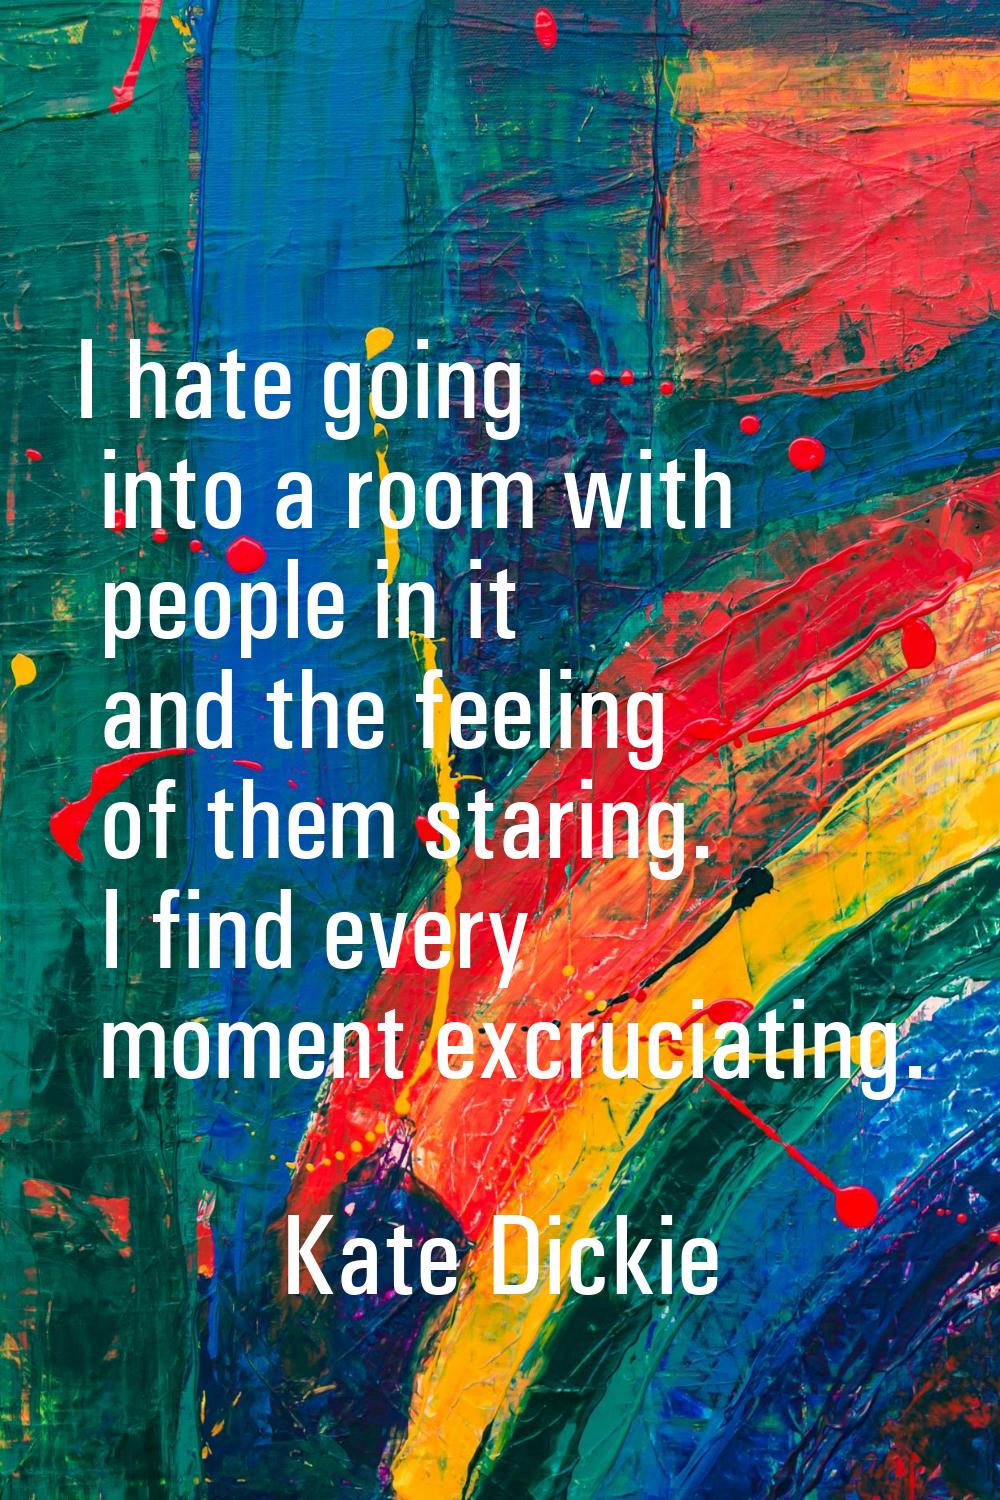 I hate going into a room with people in it and the feeling of them staring. I find every moment exc